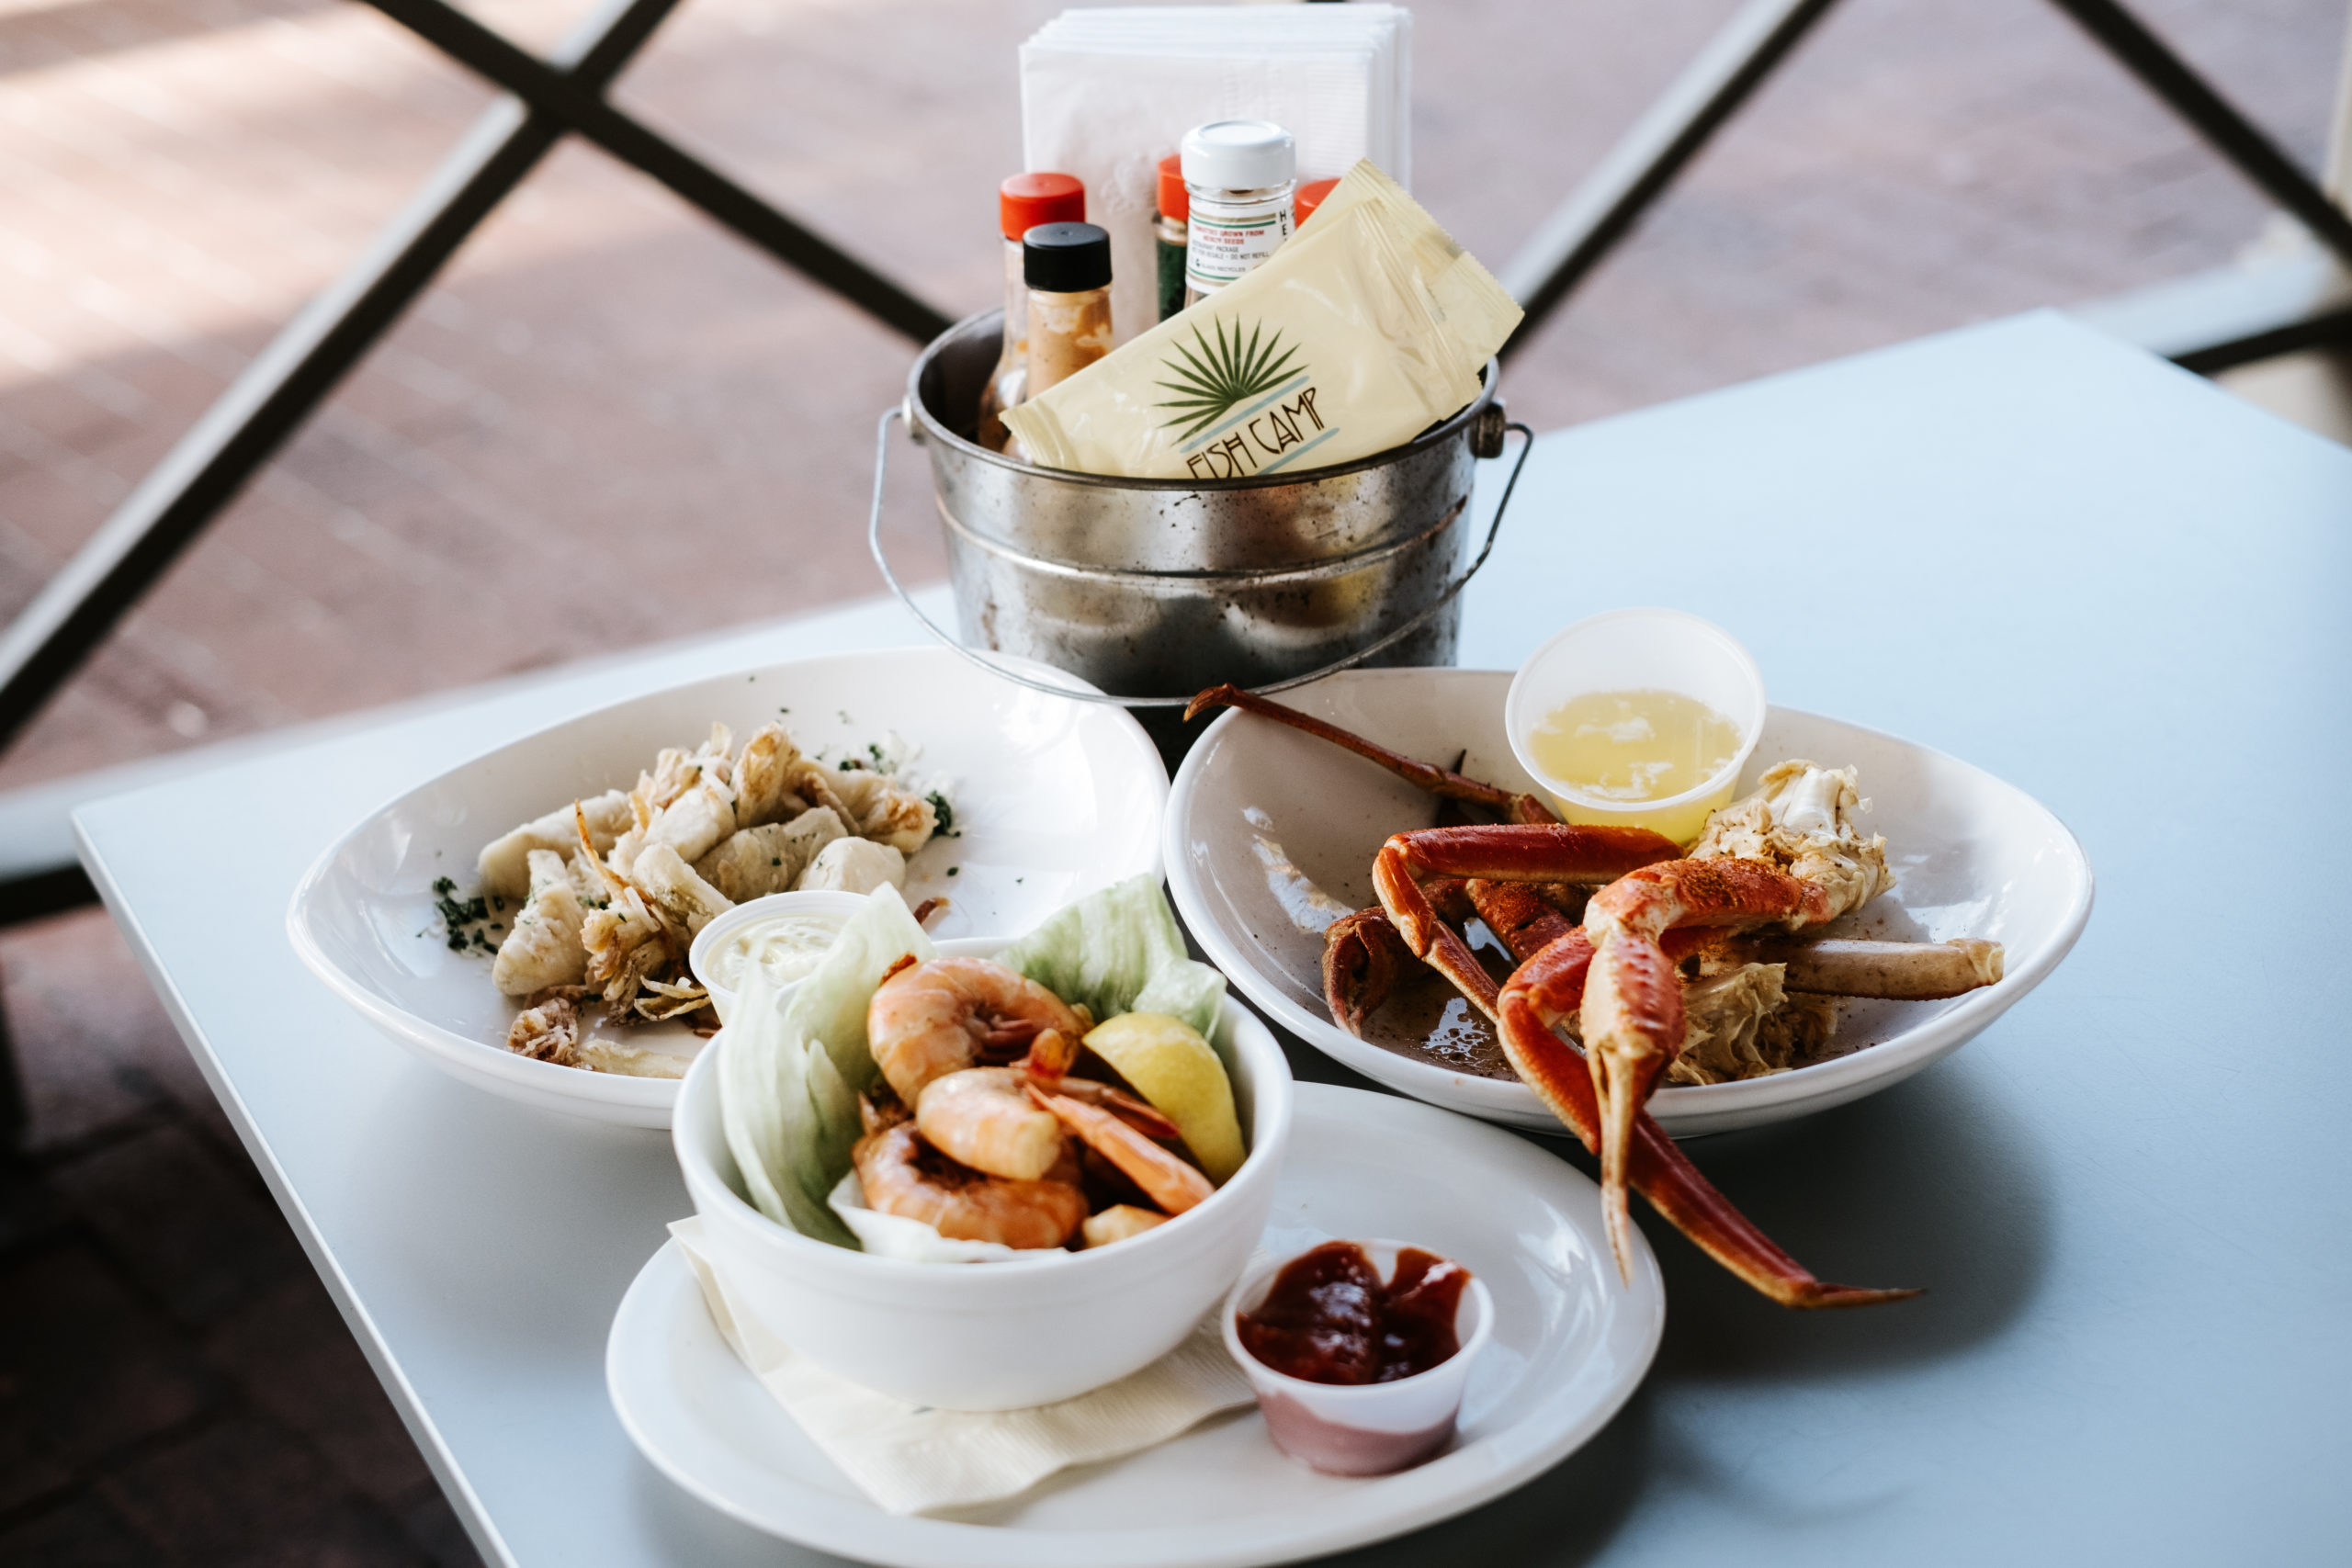 A platter of freshly-prepared seafood delicacies, salads, and side dishes is artfully arranged on the table, creating a delicious brunch spread.